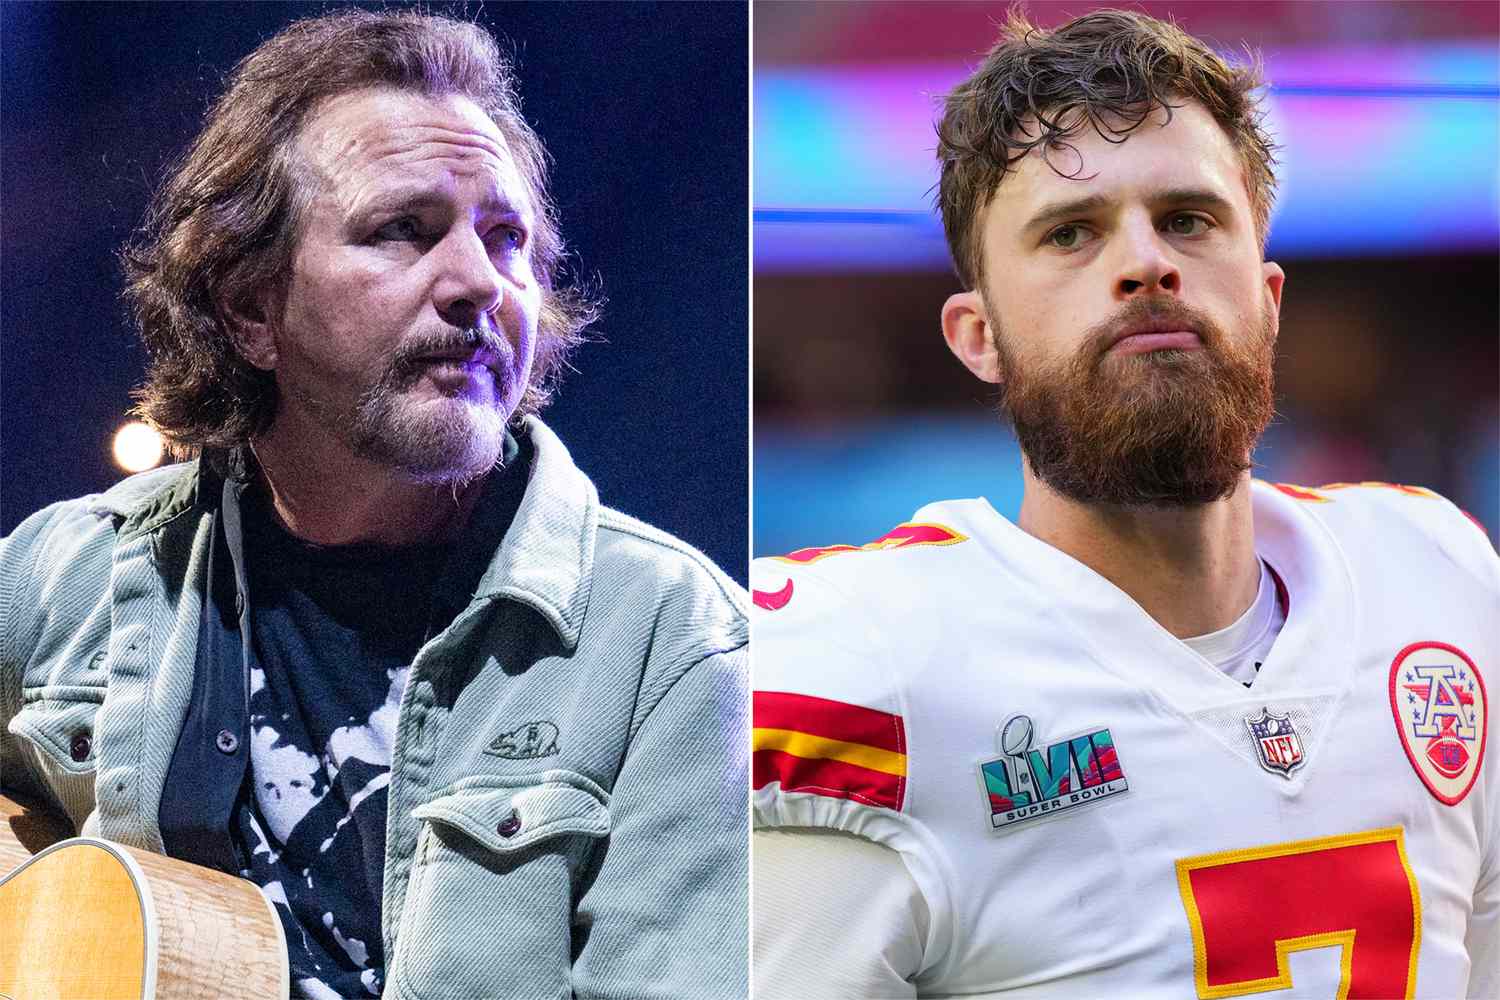 Eddie Vedder slams Harrison Butker for sexist commencement speech: 'People of quality do not fear equality'